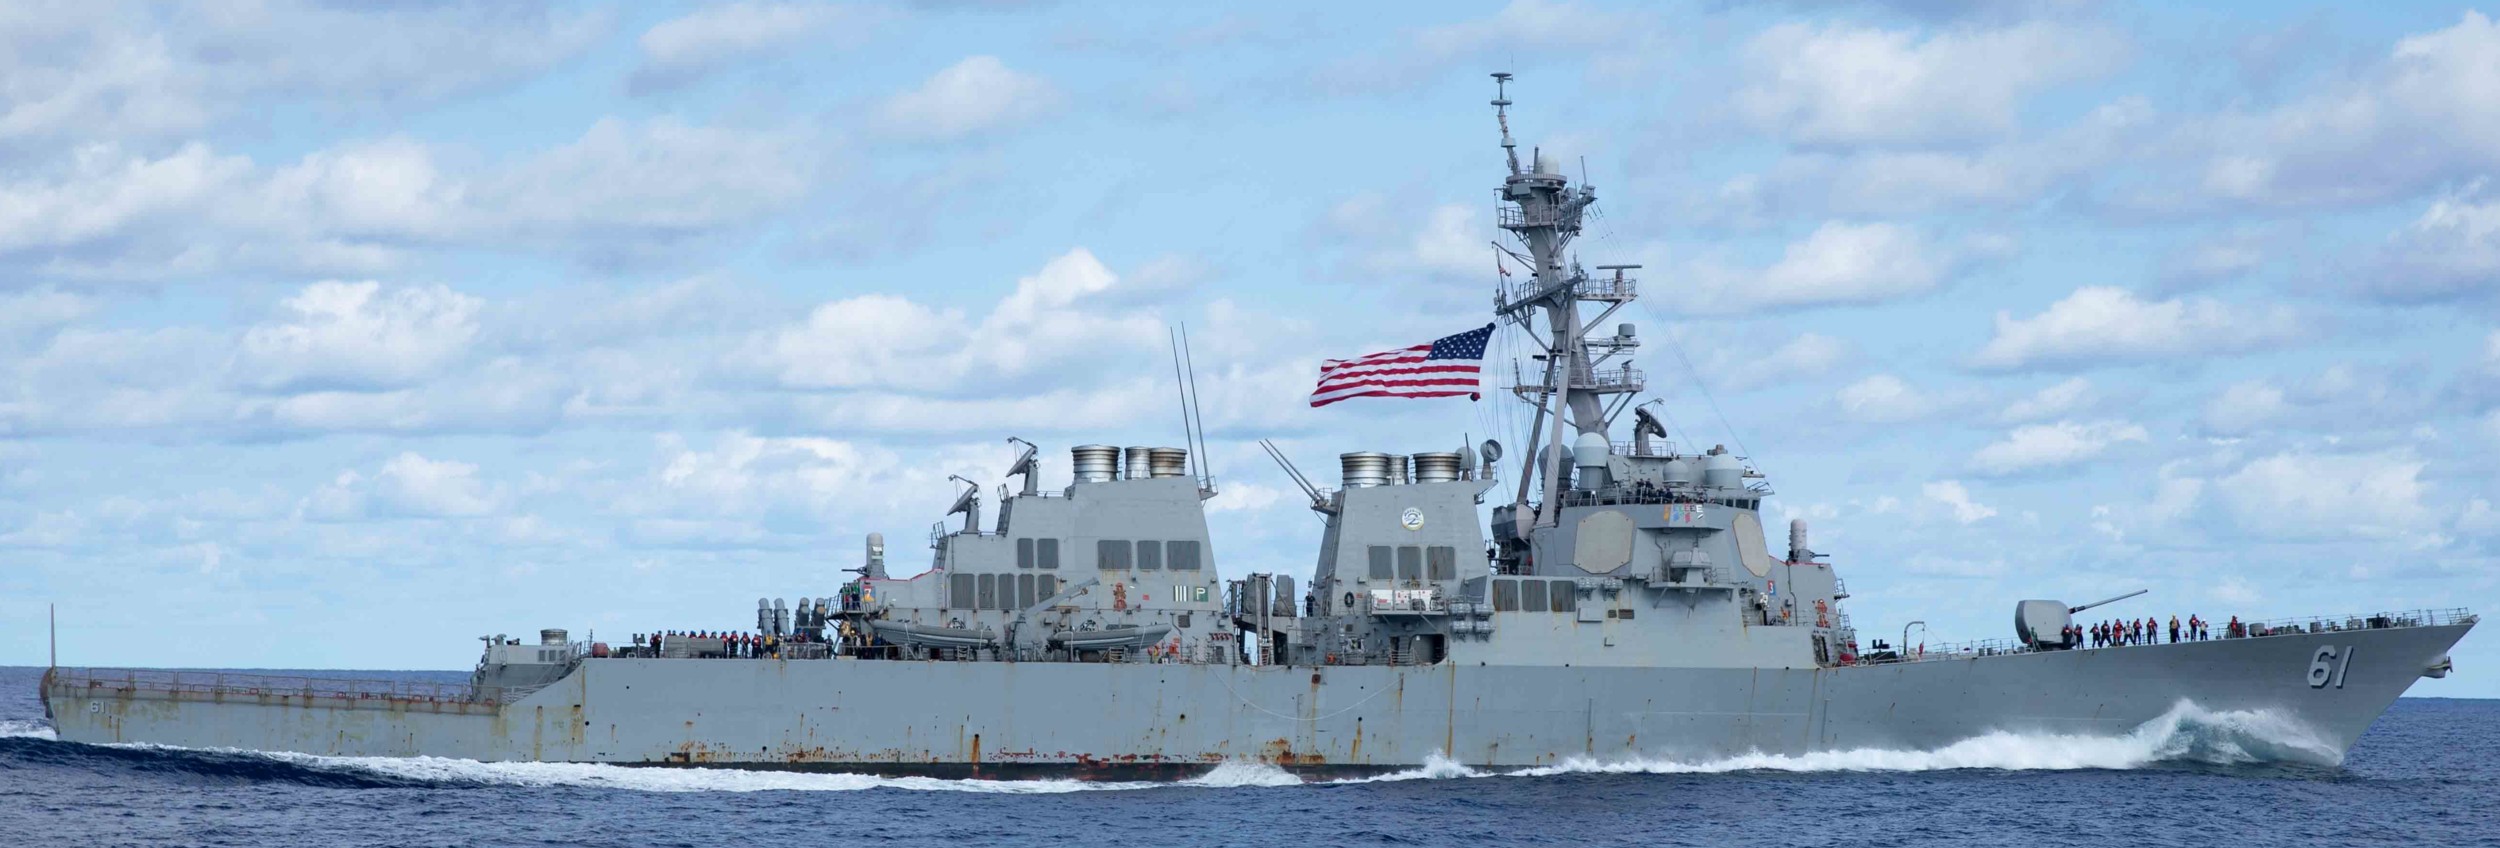 ddg-61 uss ramage guided missile destroyer arleigh burke class aegis us navy 104